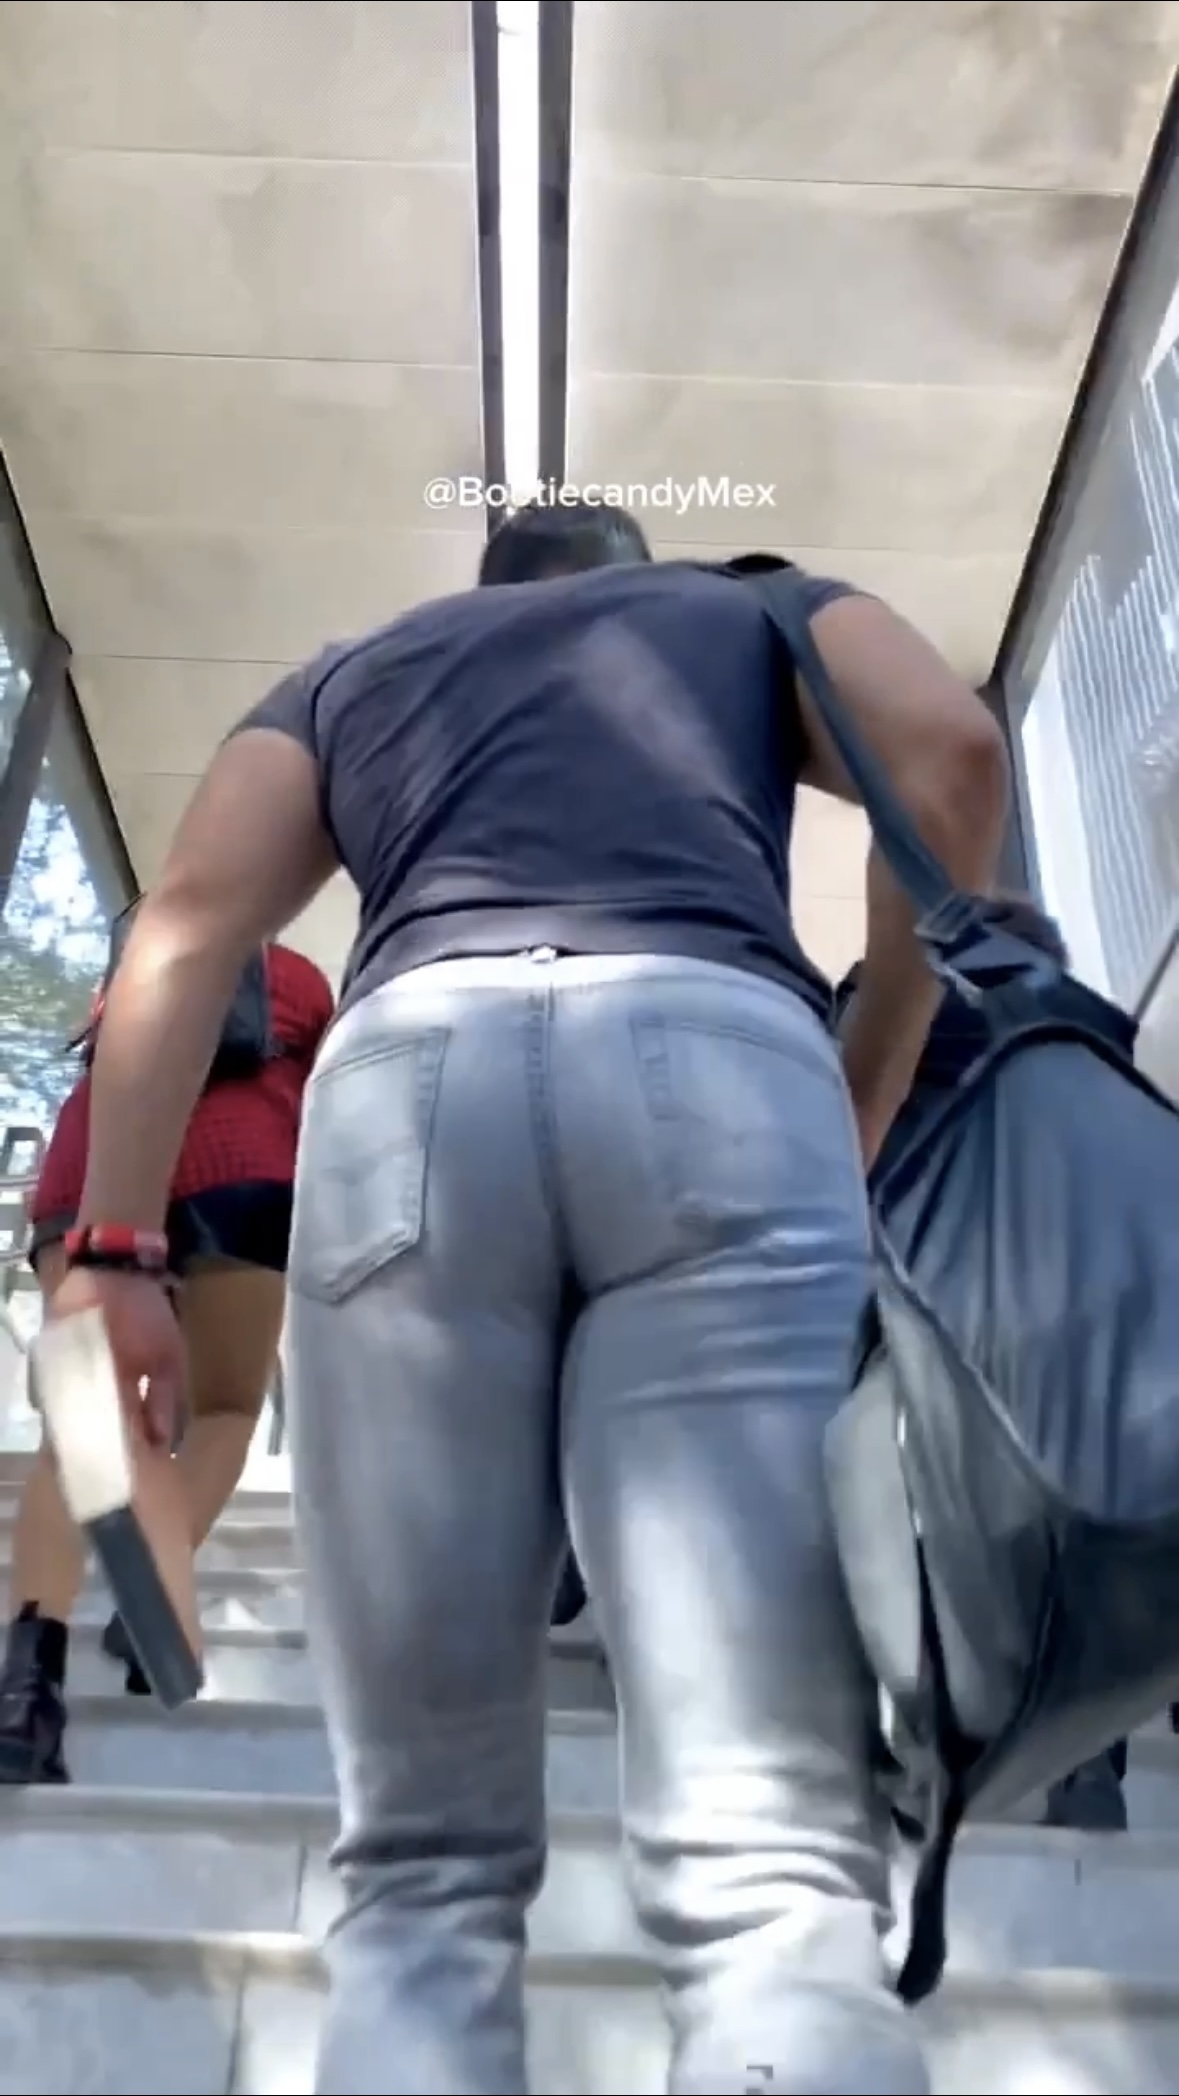 Juicy latino tight jeans booty walking up subway stairs